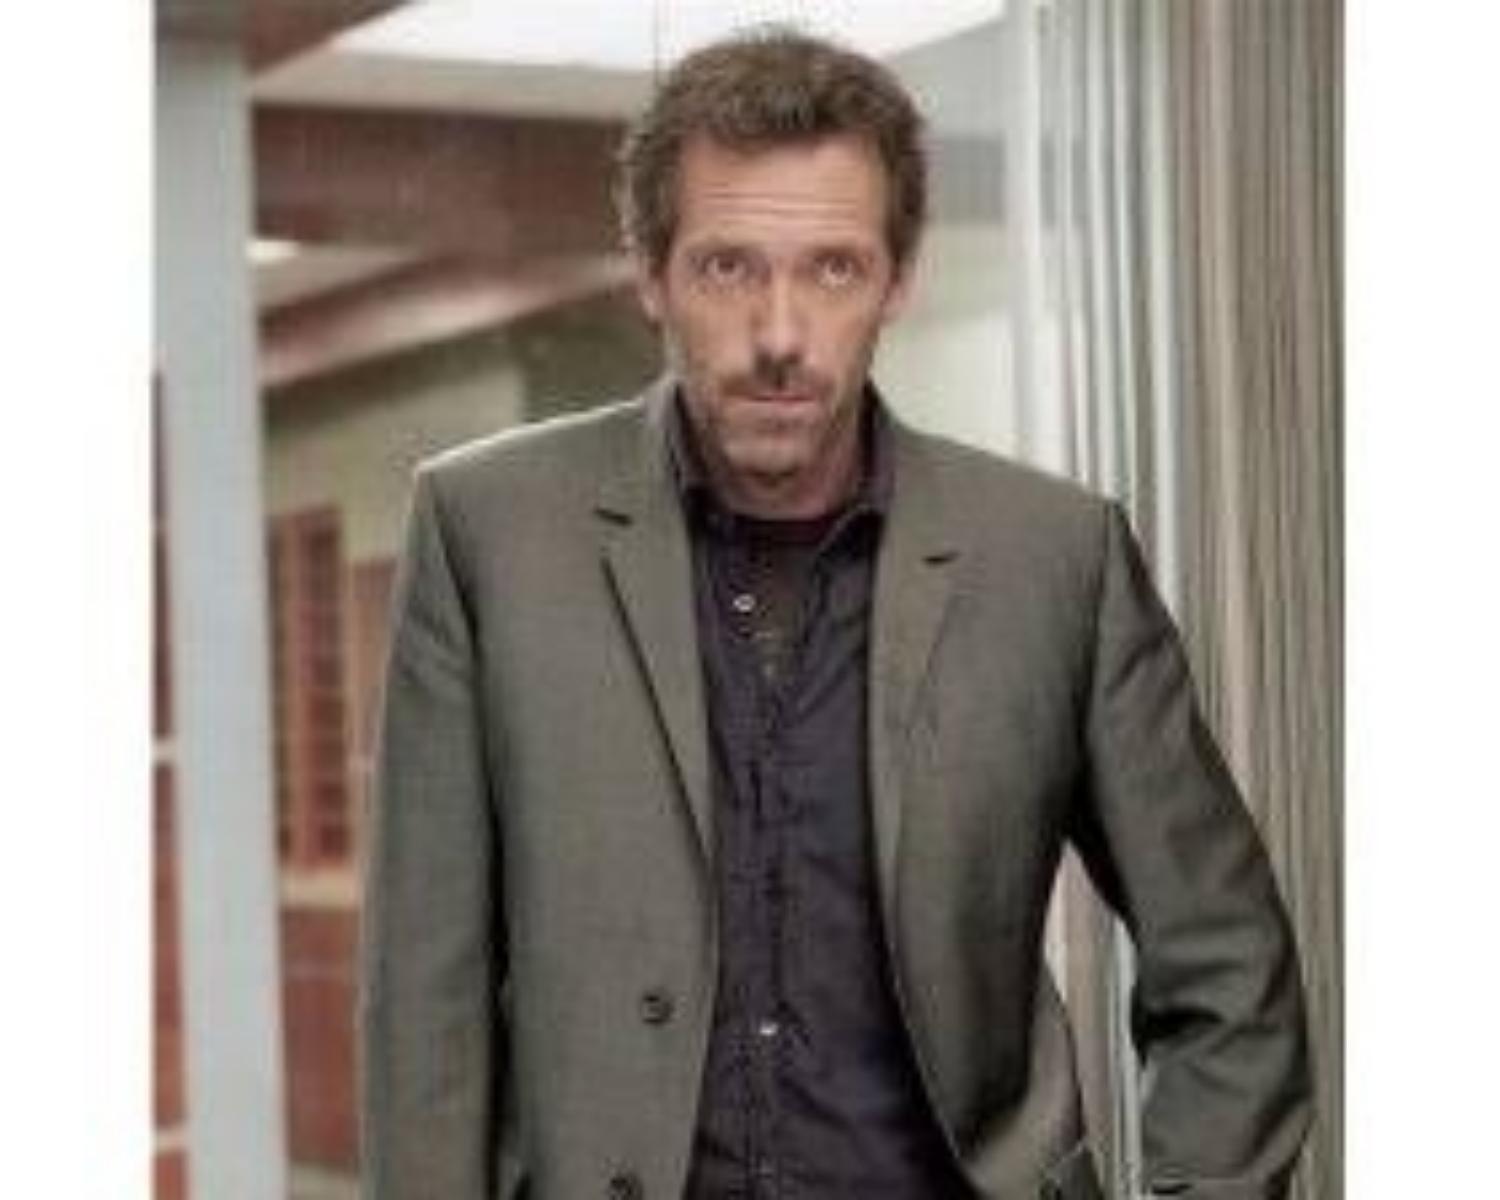 HOUSE MD